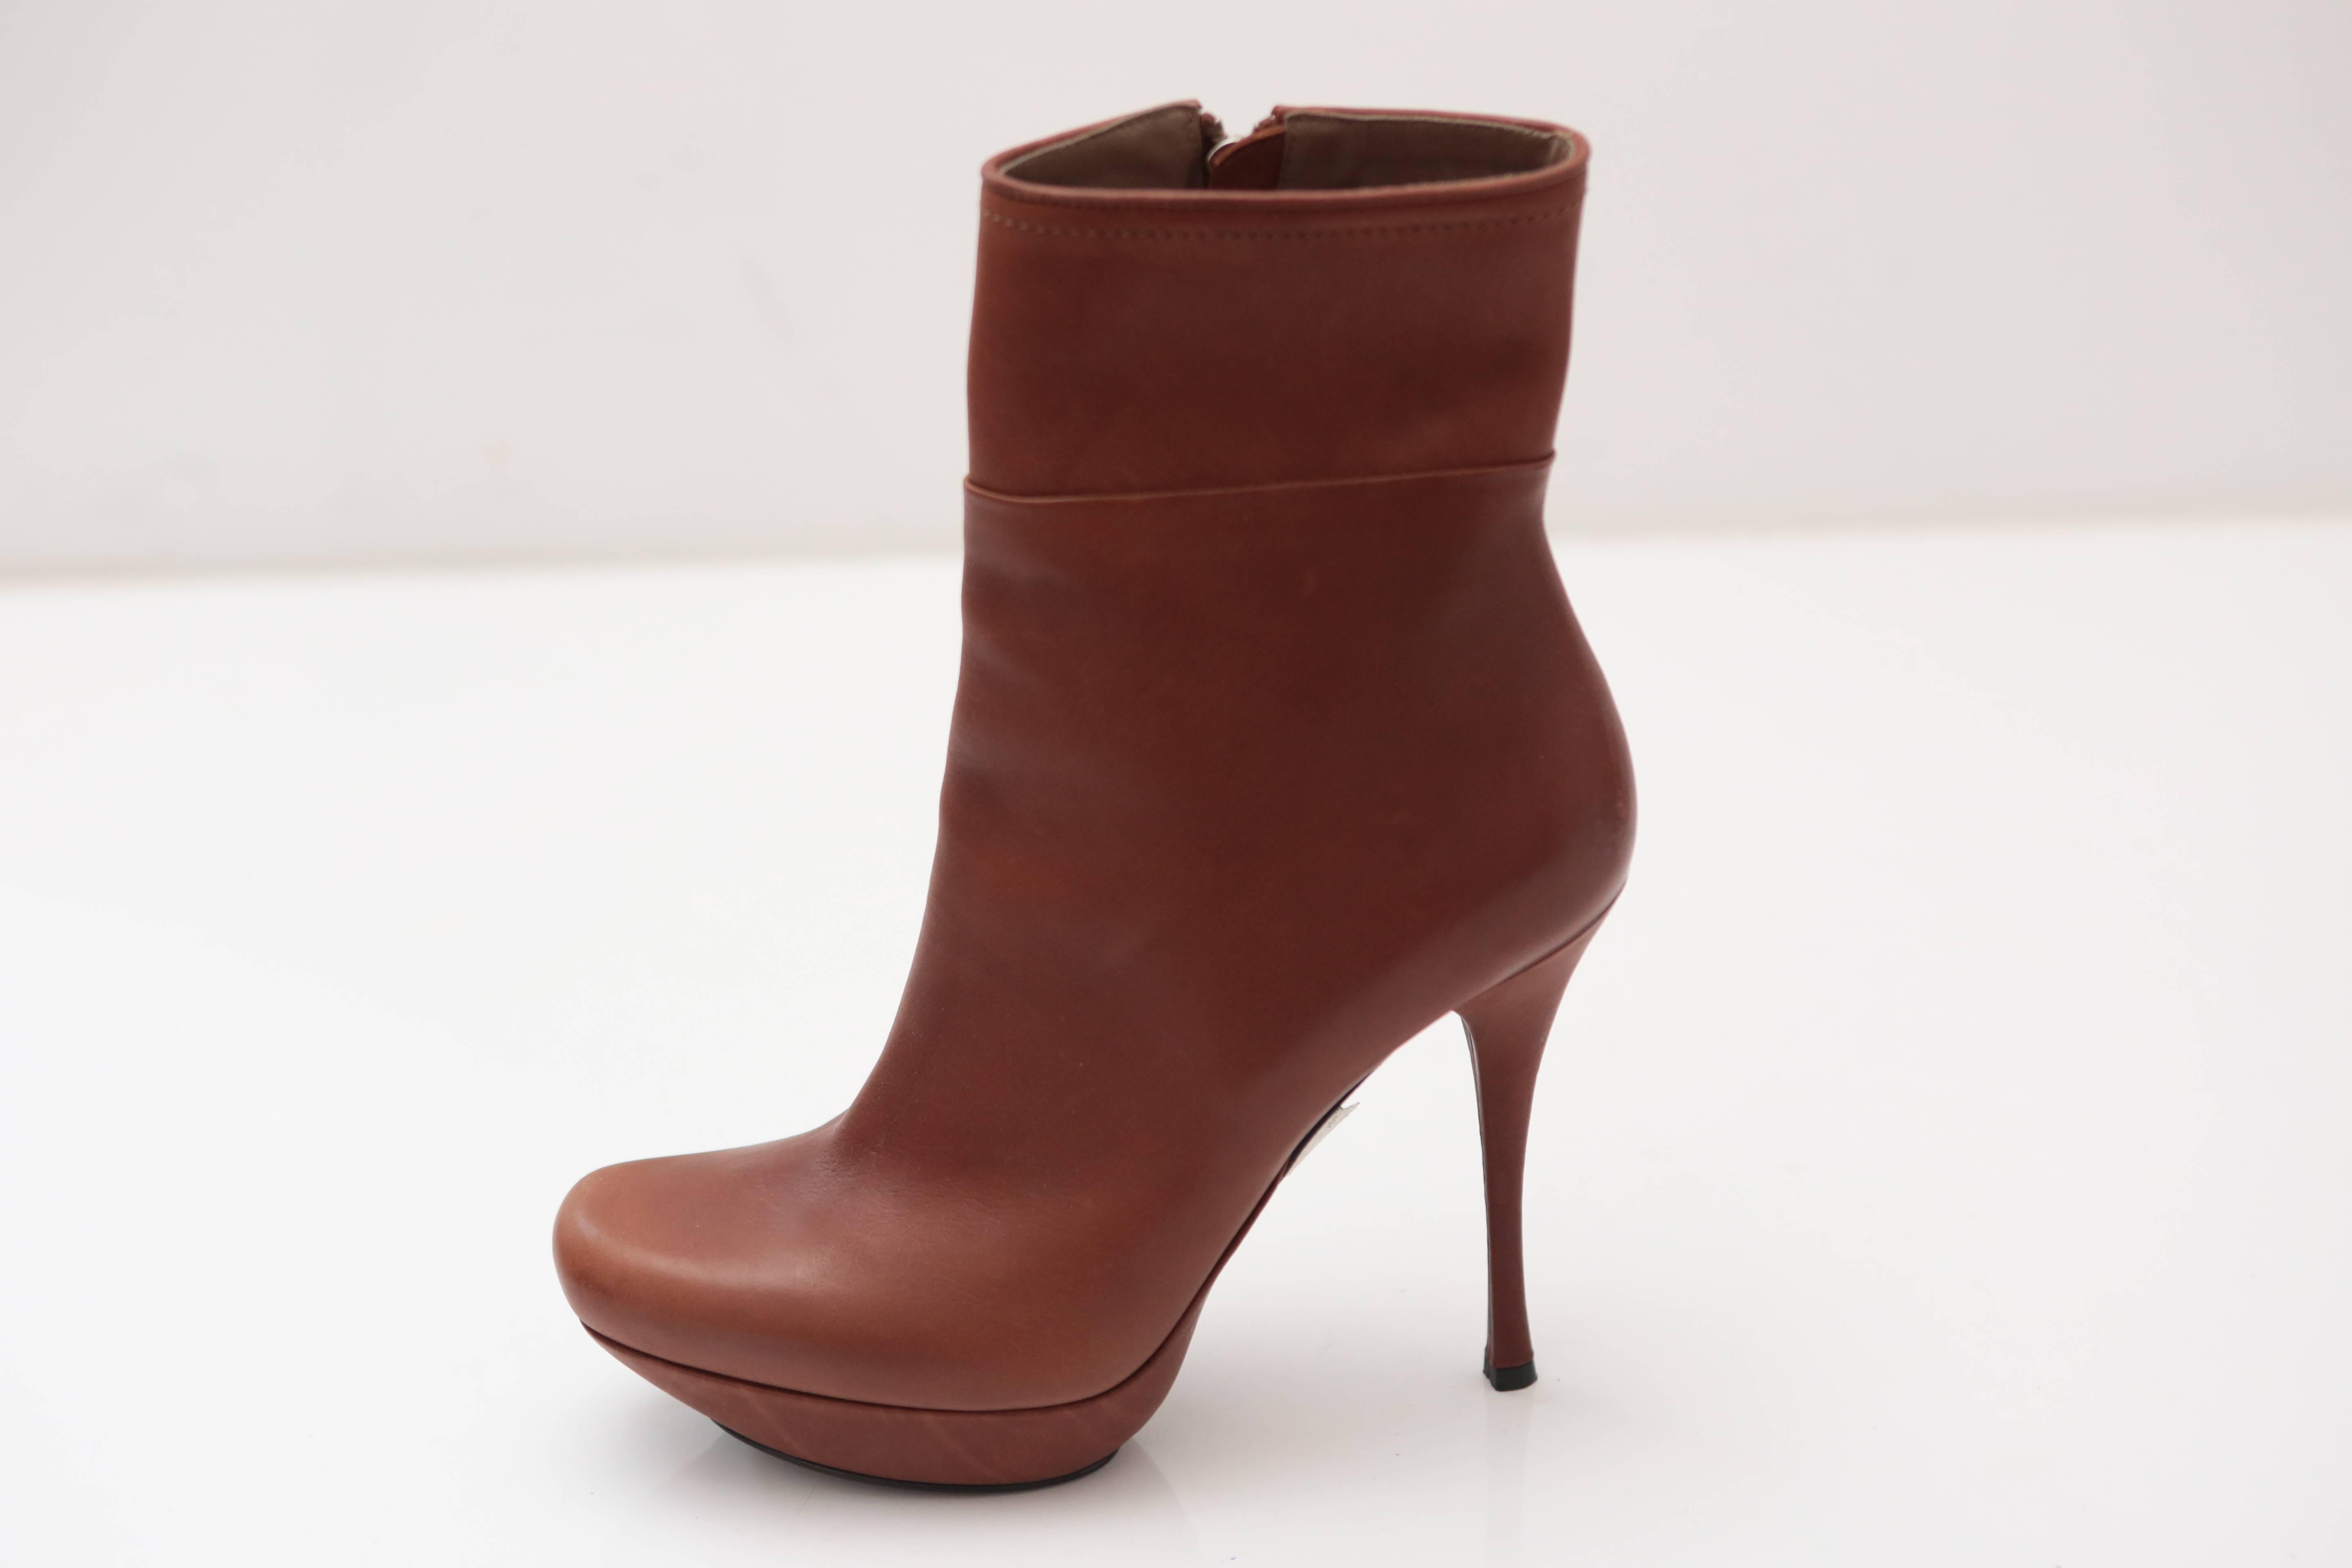 Classic soft brown leather heeled booties with interior full zipper in silver.